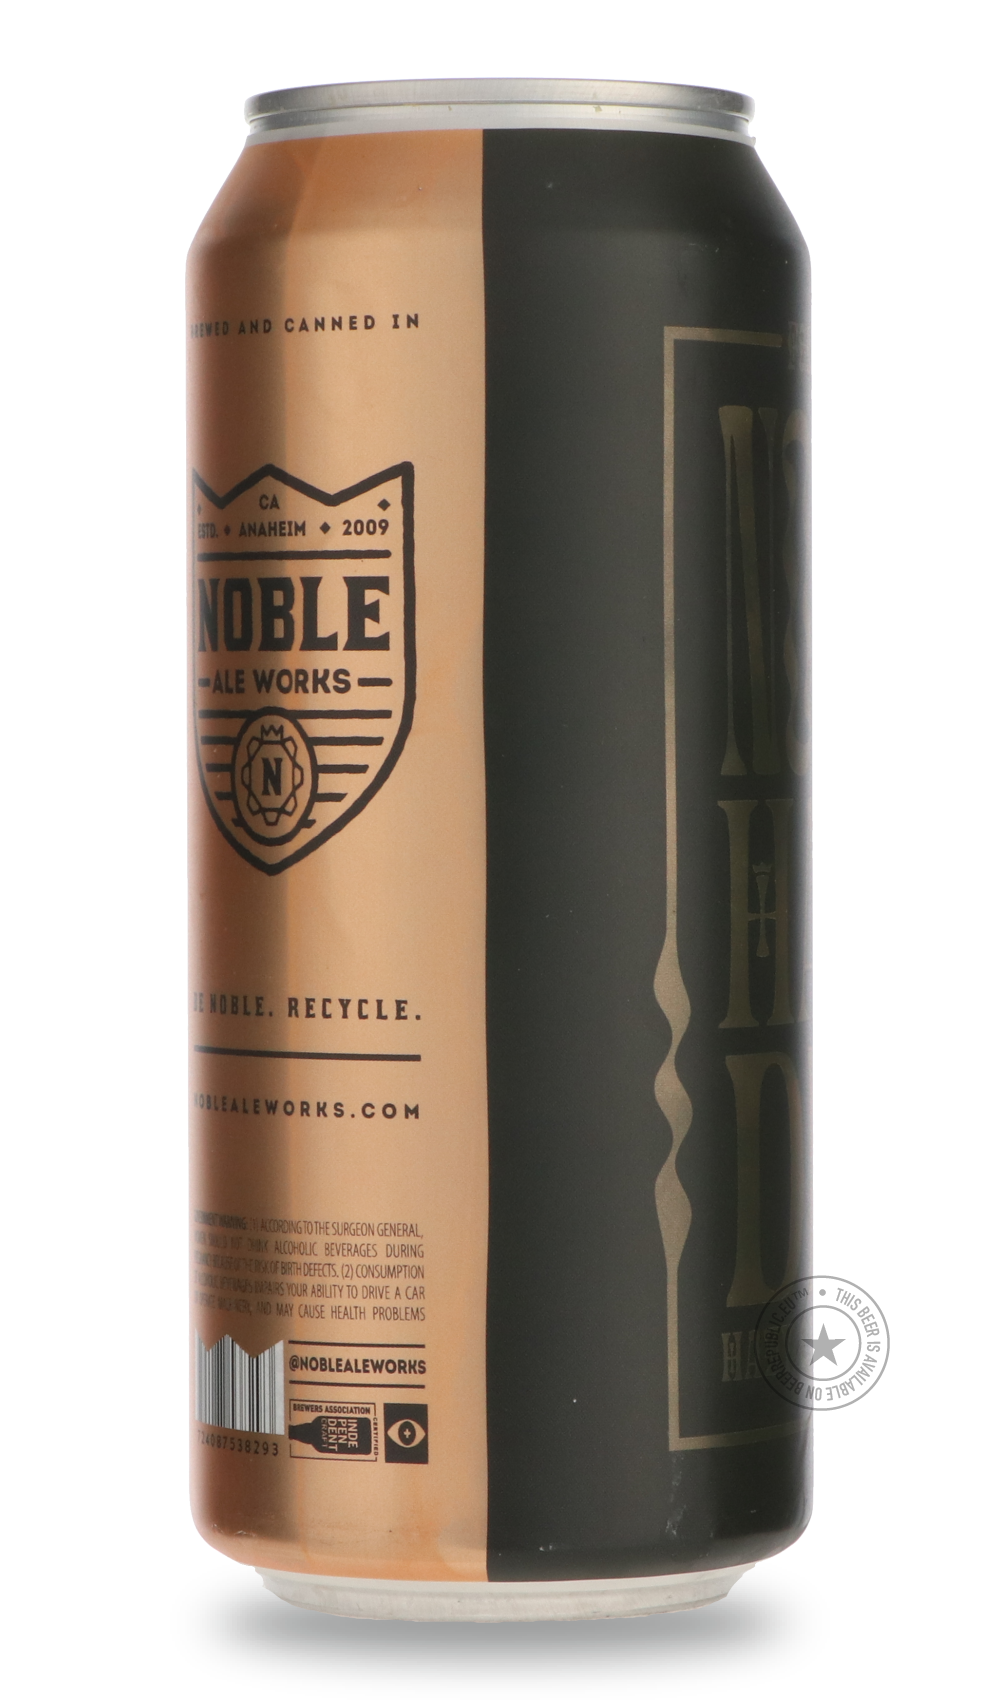 -Noble- Felt Otay-Pale- Only @ Beer Republic - The best online beer store for American & Canadian craft beer - Buy beer online from the USA and Canada - Bier online kopen - Amerikaans bier kopen - Craft beer store - Craft beer kopen - Amerikanisch bier kaufen - Bier online kaufen - Acheter biere online - IPA - Stout - Porter - New England IPA - Hazy IPA - Imperial Stout - Barrel Aged - Barrel Aged Imperial Stout - Brown - Dark beer - Blond - Blonde - Pilsner - Lager - Wheat - Weizen - Amber - Barley Wine - 